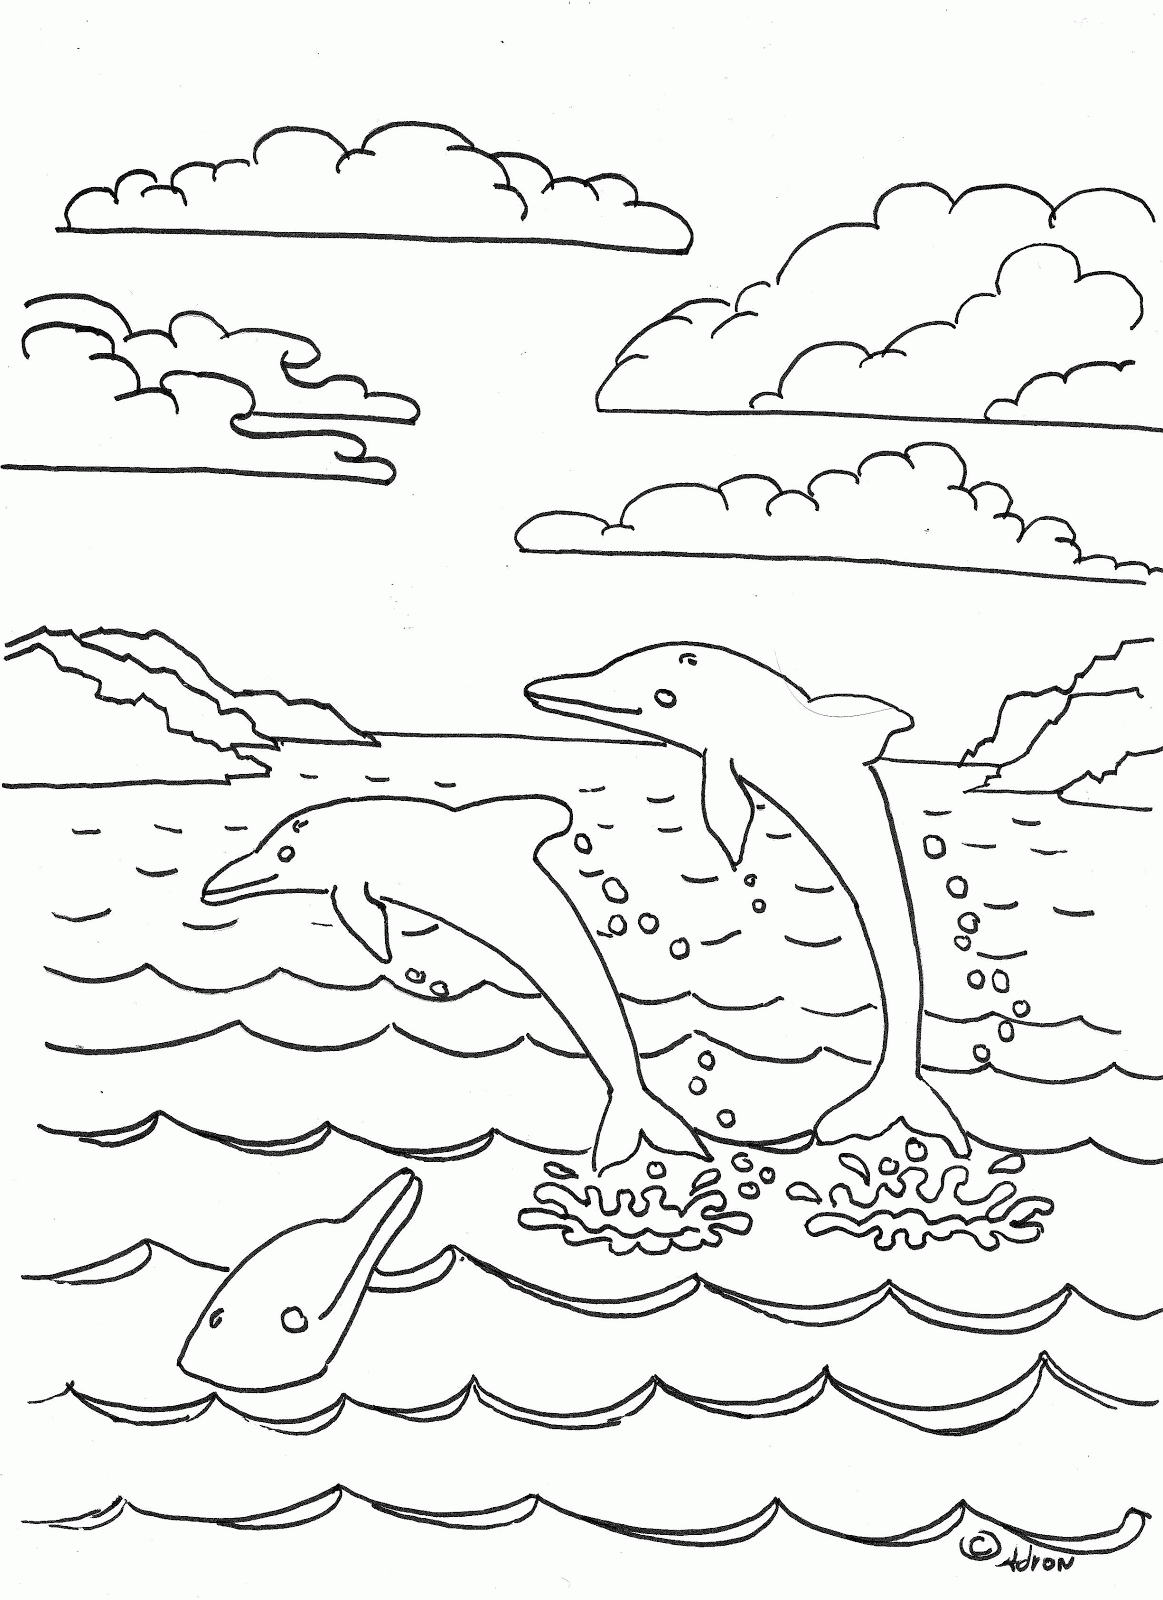 Ariel And Dolphin Coloring Pages - Coloring Pages For All Ages